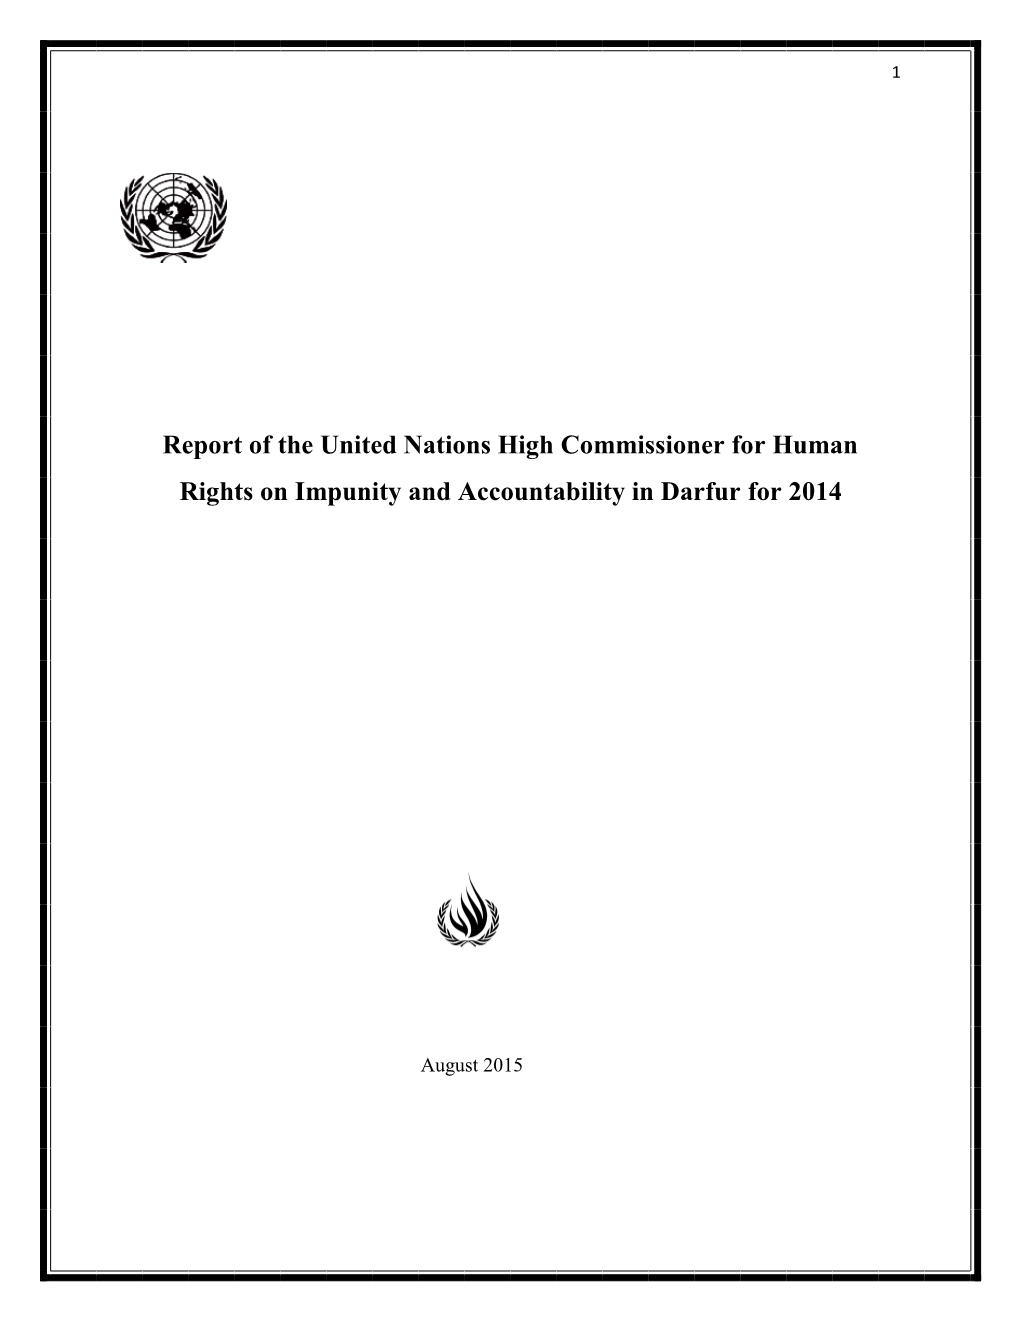 Report of the United Nations High Commissioner for Human Rights on Impunity and Accountability in Darfur for 2014